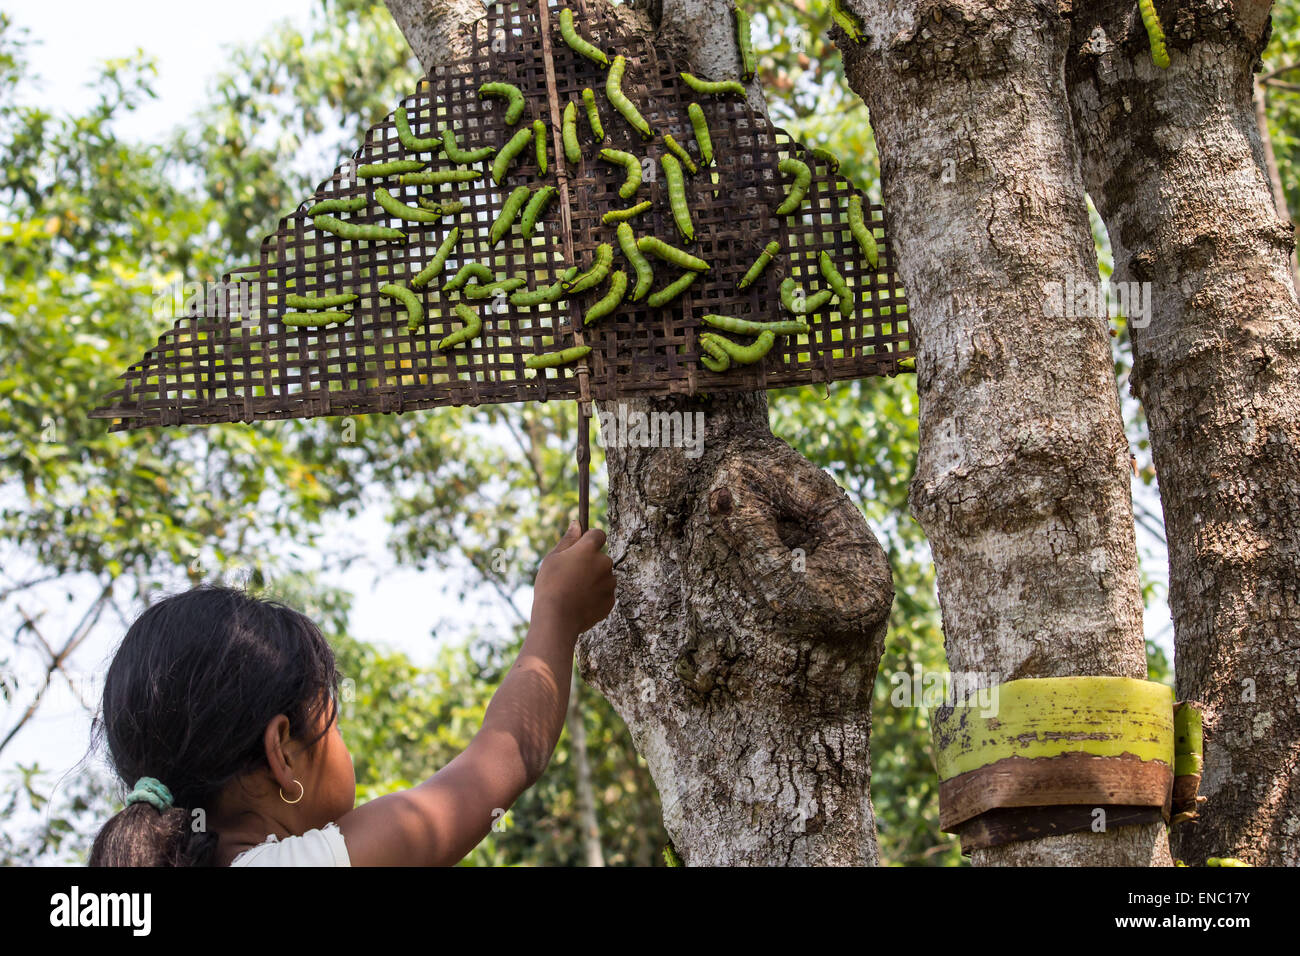 May 2, 2015 - Sivasagar, Assam, India - An Indian girl releases half grown Muga Silkworms on a Som tree (Machilus Bombycina) for its further growth in the Bakata village in Sivasagar district of northeastern Assam state on May 02, 2015. Muga silk is the product of the silkworm Antheraea assamensis endemic to Assam. The larvae of these moths feed on som (Machilus bombycina) leaves. The silk produced is known for its glossy fine texture and durability. Muga Sulkworm farming is one of the most profitable businesses in the Indian Assam state as the product has a high market value. (Credit Image: © Stock Photo